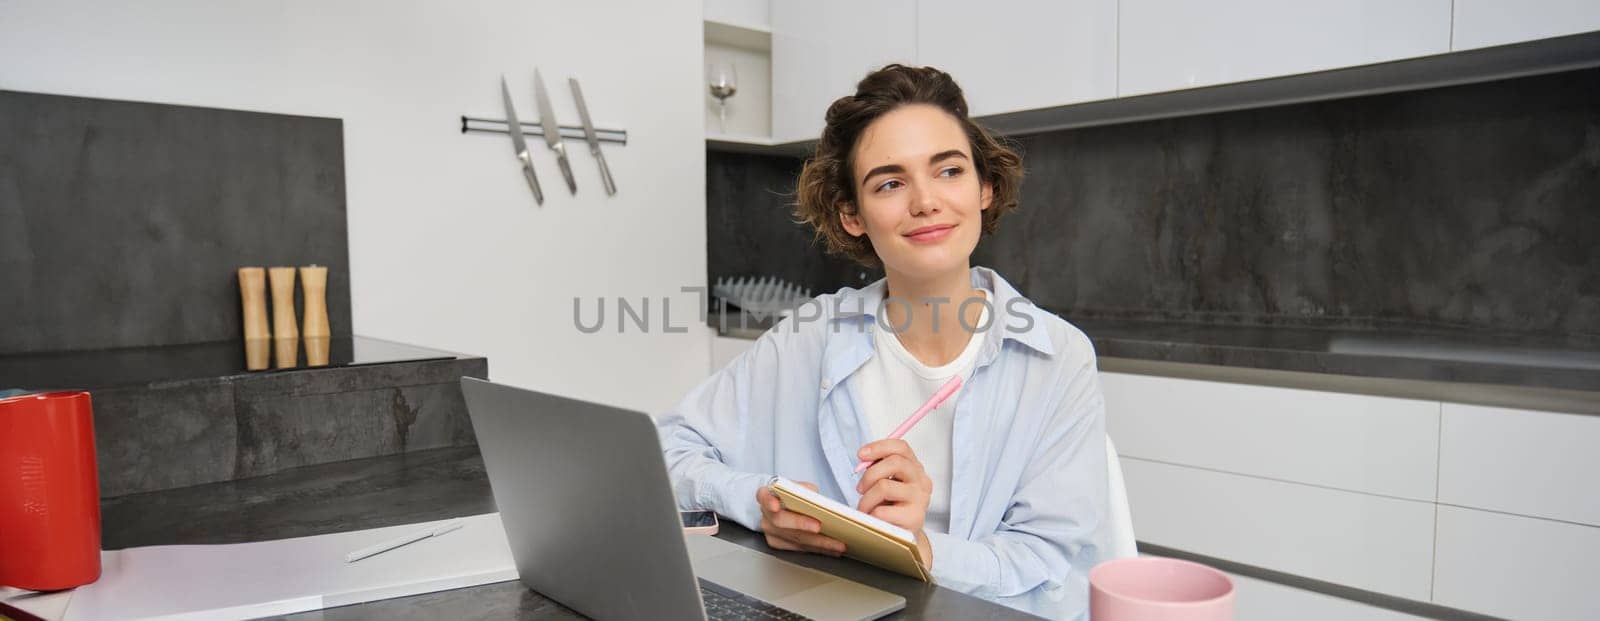 Smiling creative woman, holds pen and notebook, looks thoughtful, works from home with laptop in kitchen, thinking.